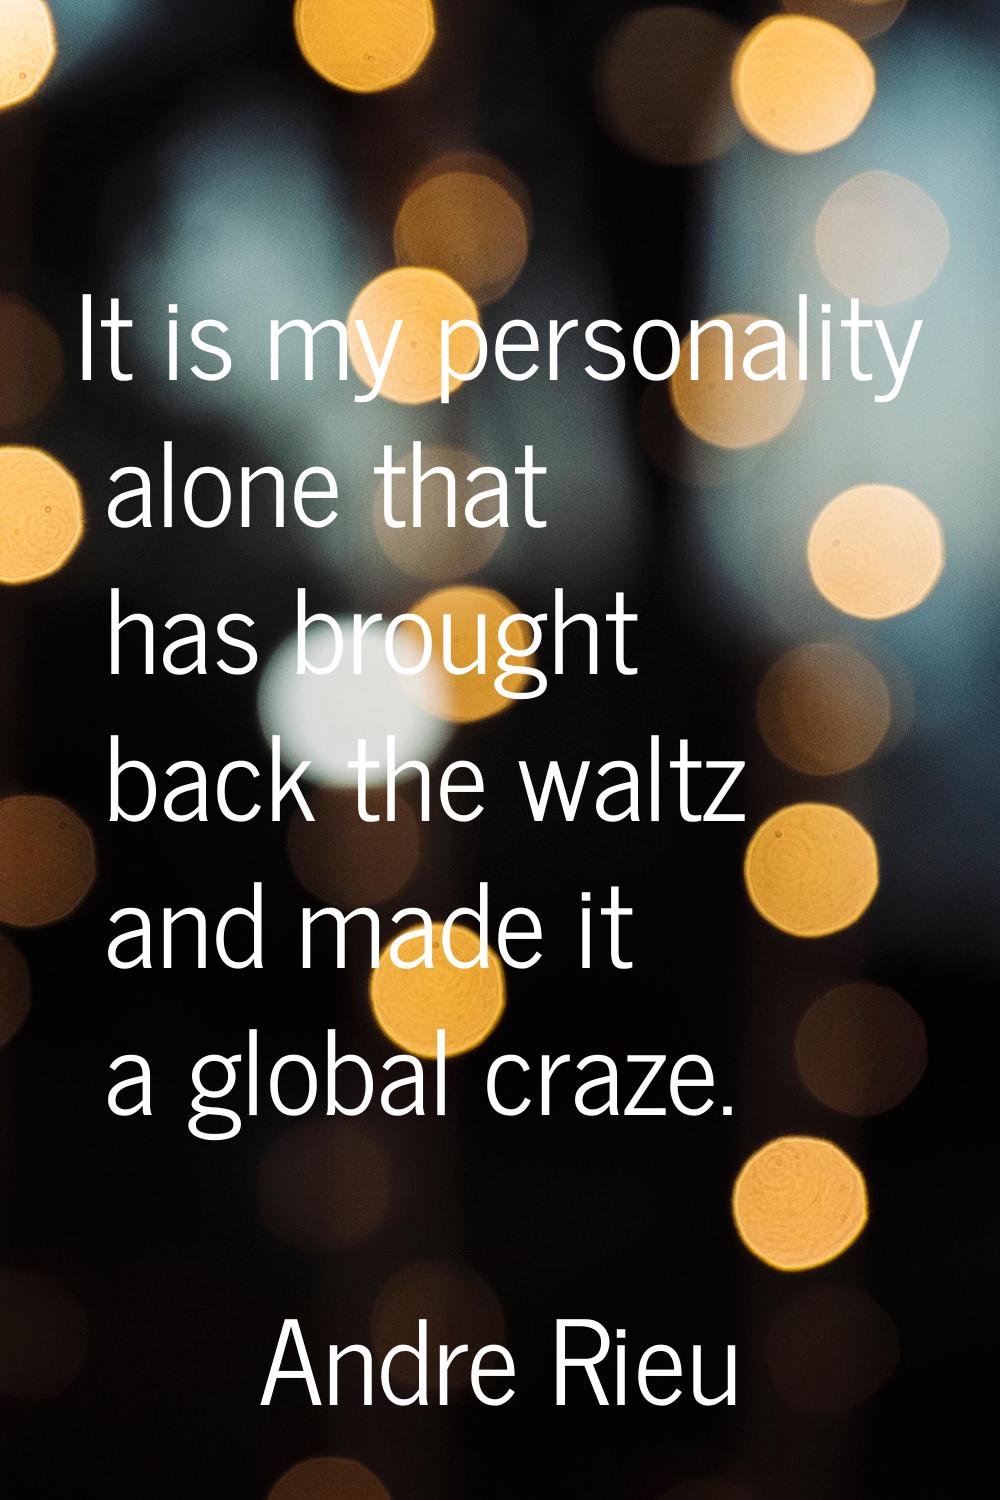 It is my personality alone that has brought back the waltz and made it a global craze.